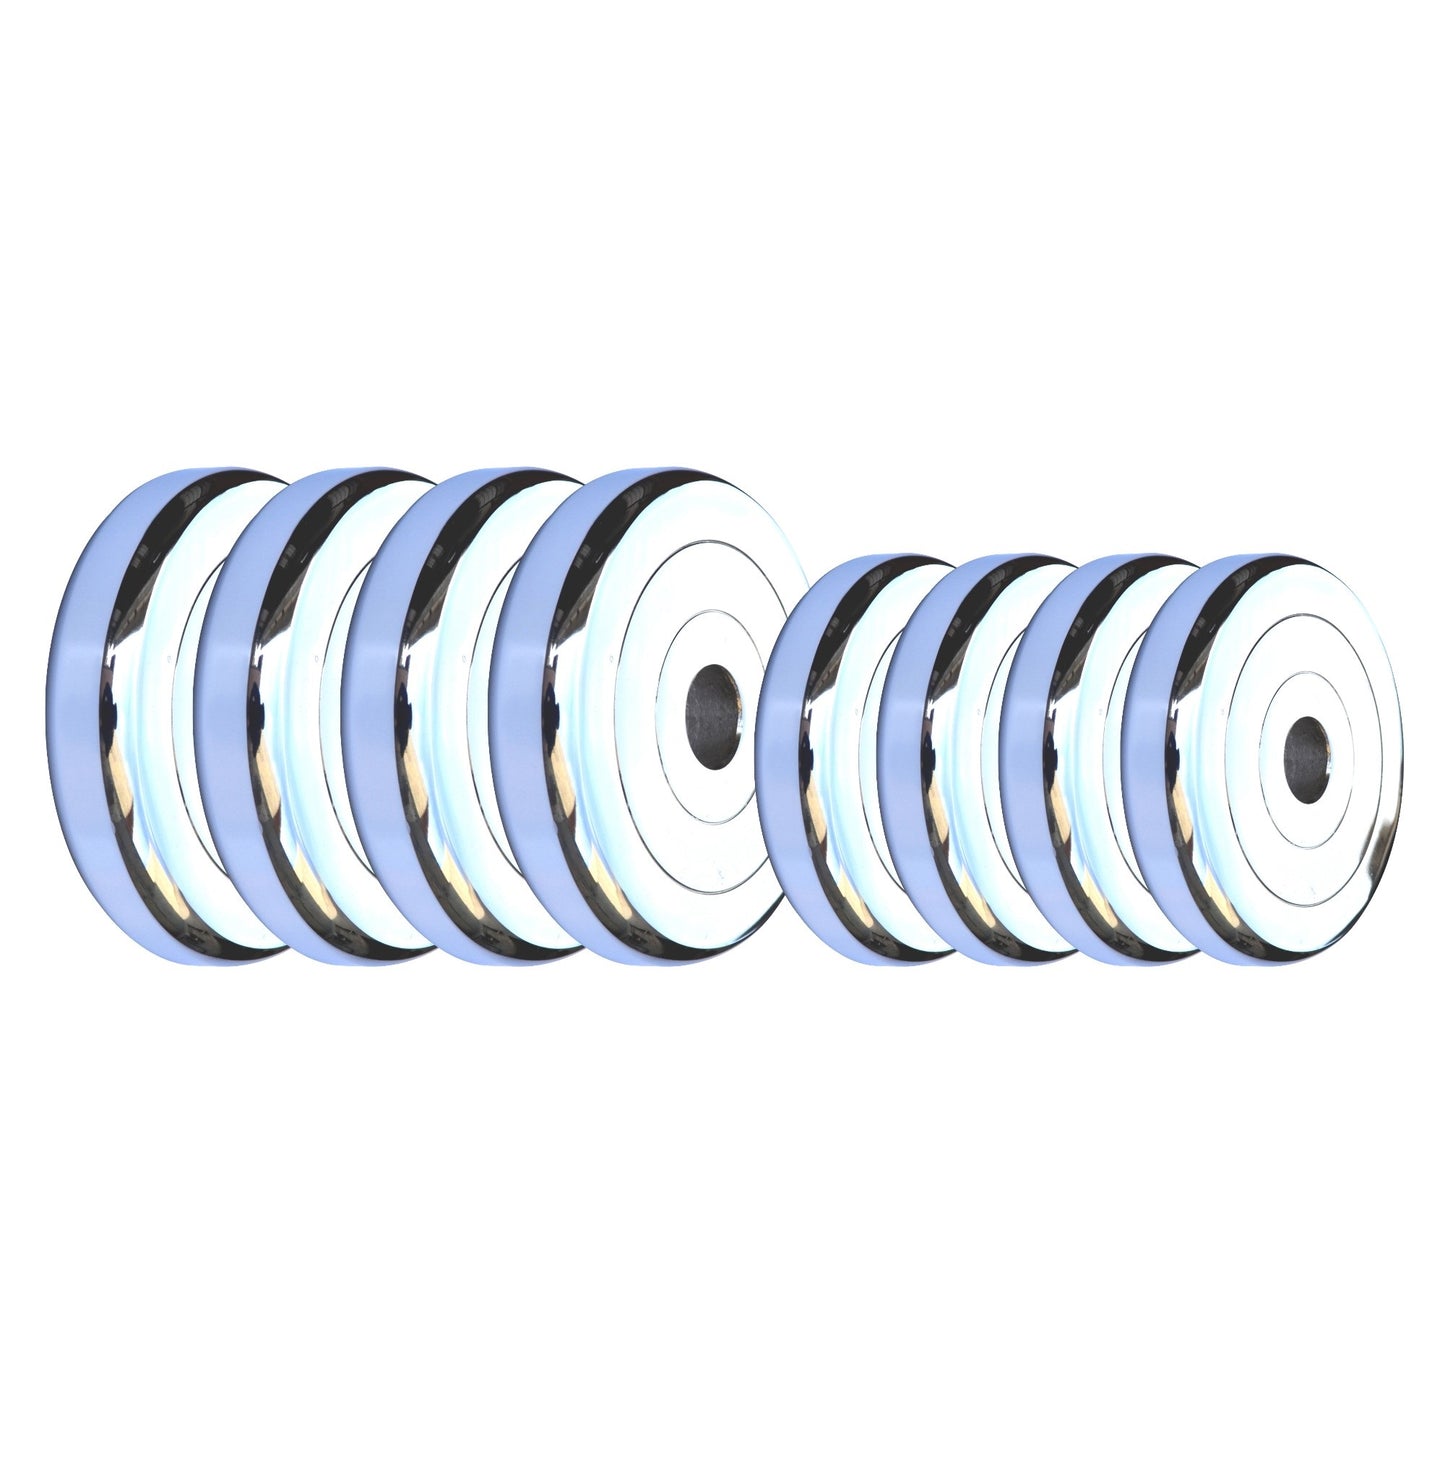 Kore Steel 10-40 Kg Spare Weight Plates Combo